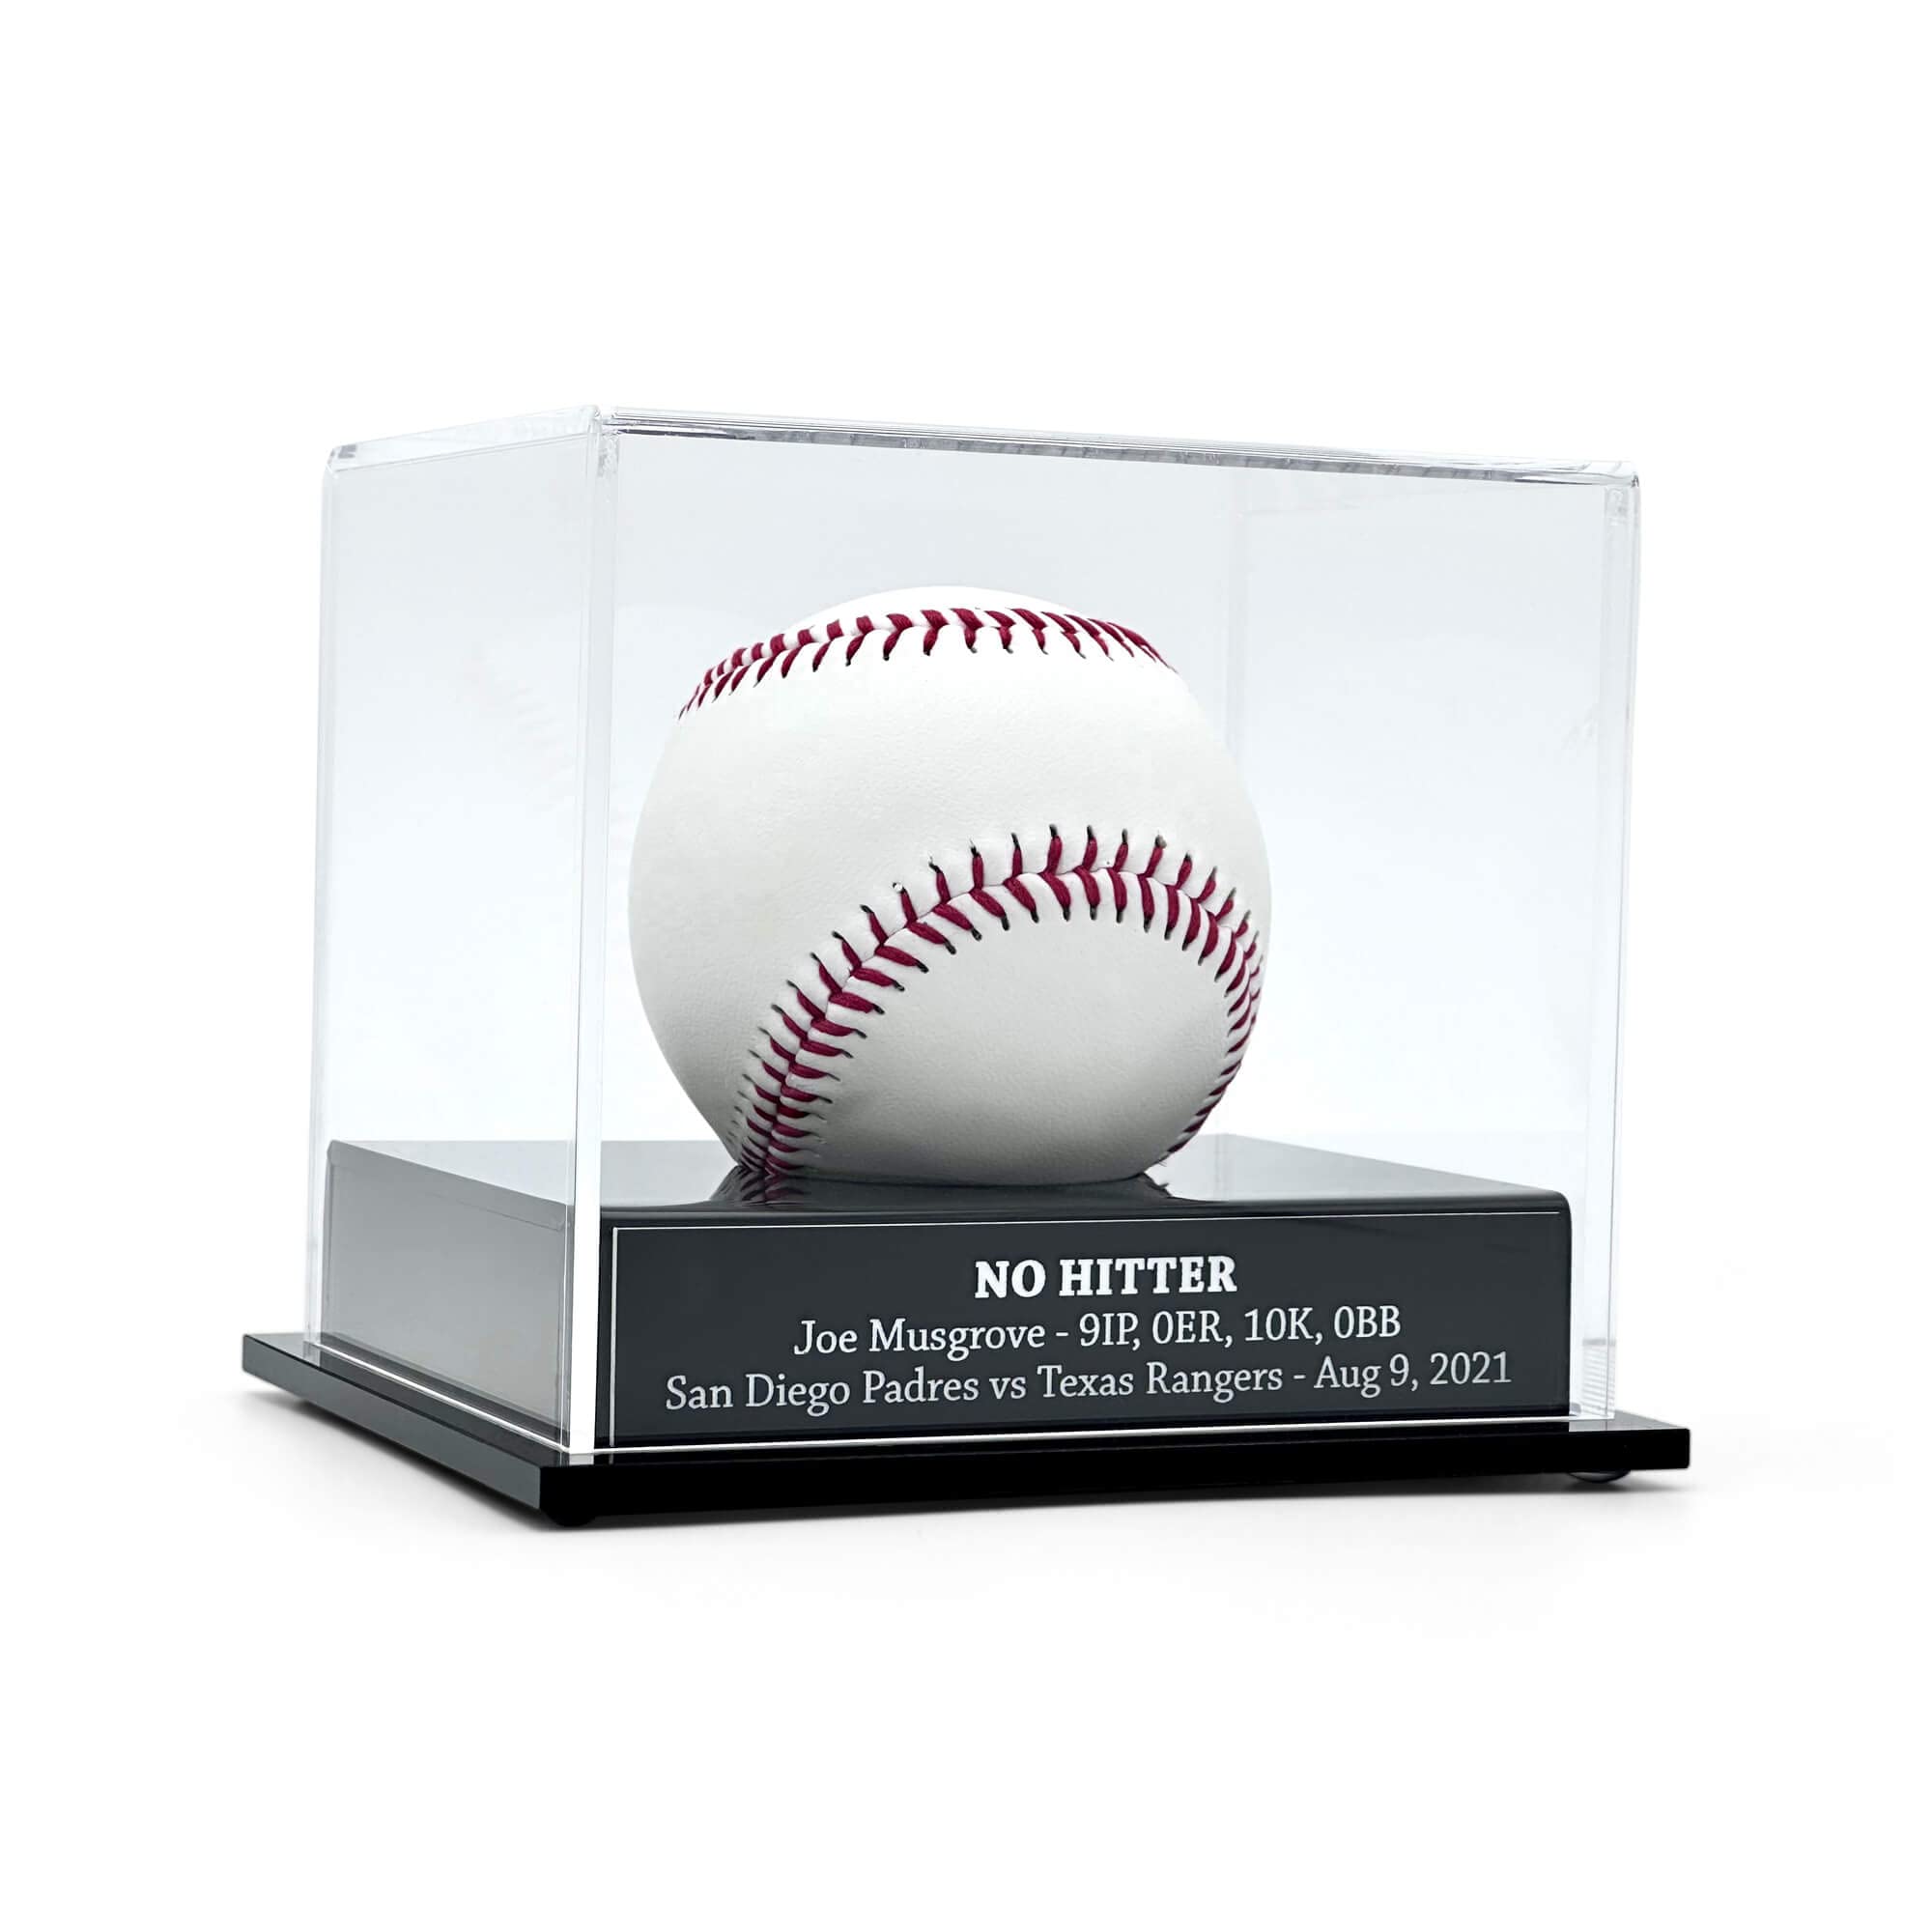 Preserve and showcase a special baseball in an engraved display case